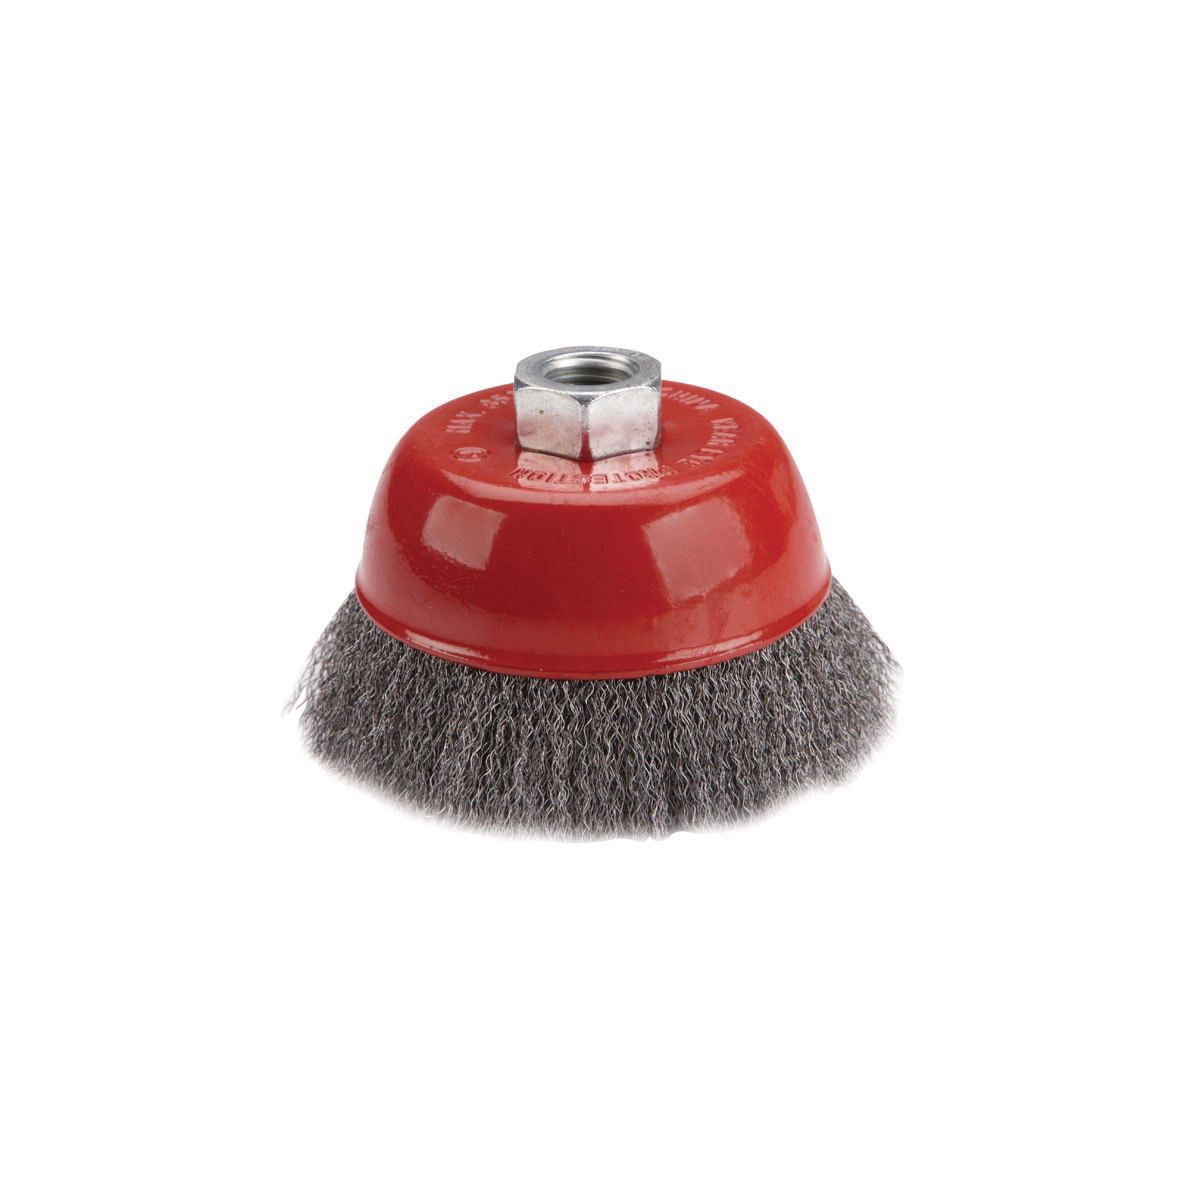 WARRIOR 4 in. Crimped Wire Cup Brush - Item 60321 / 63525 / 65050